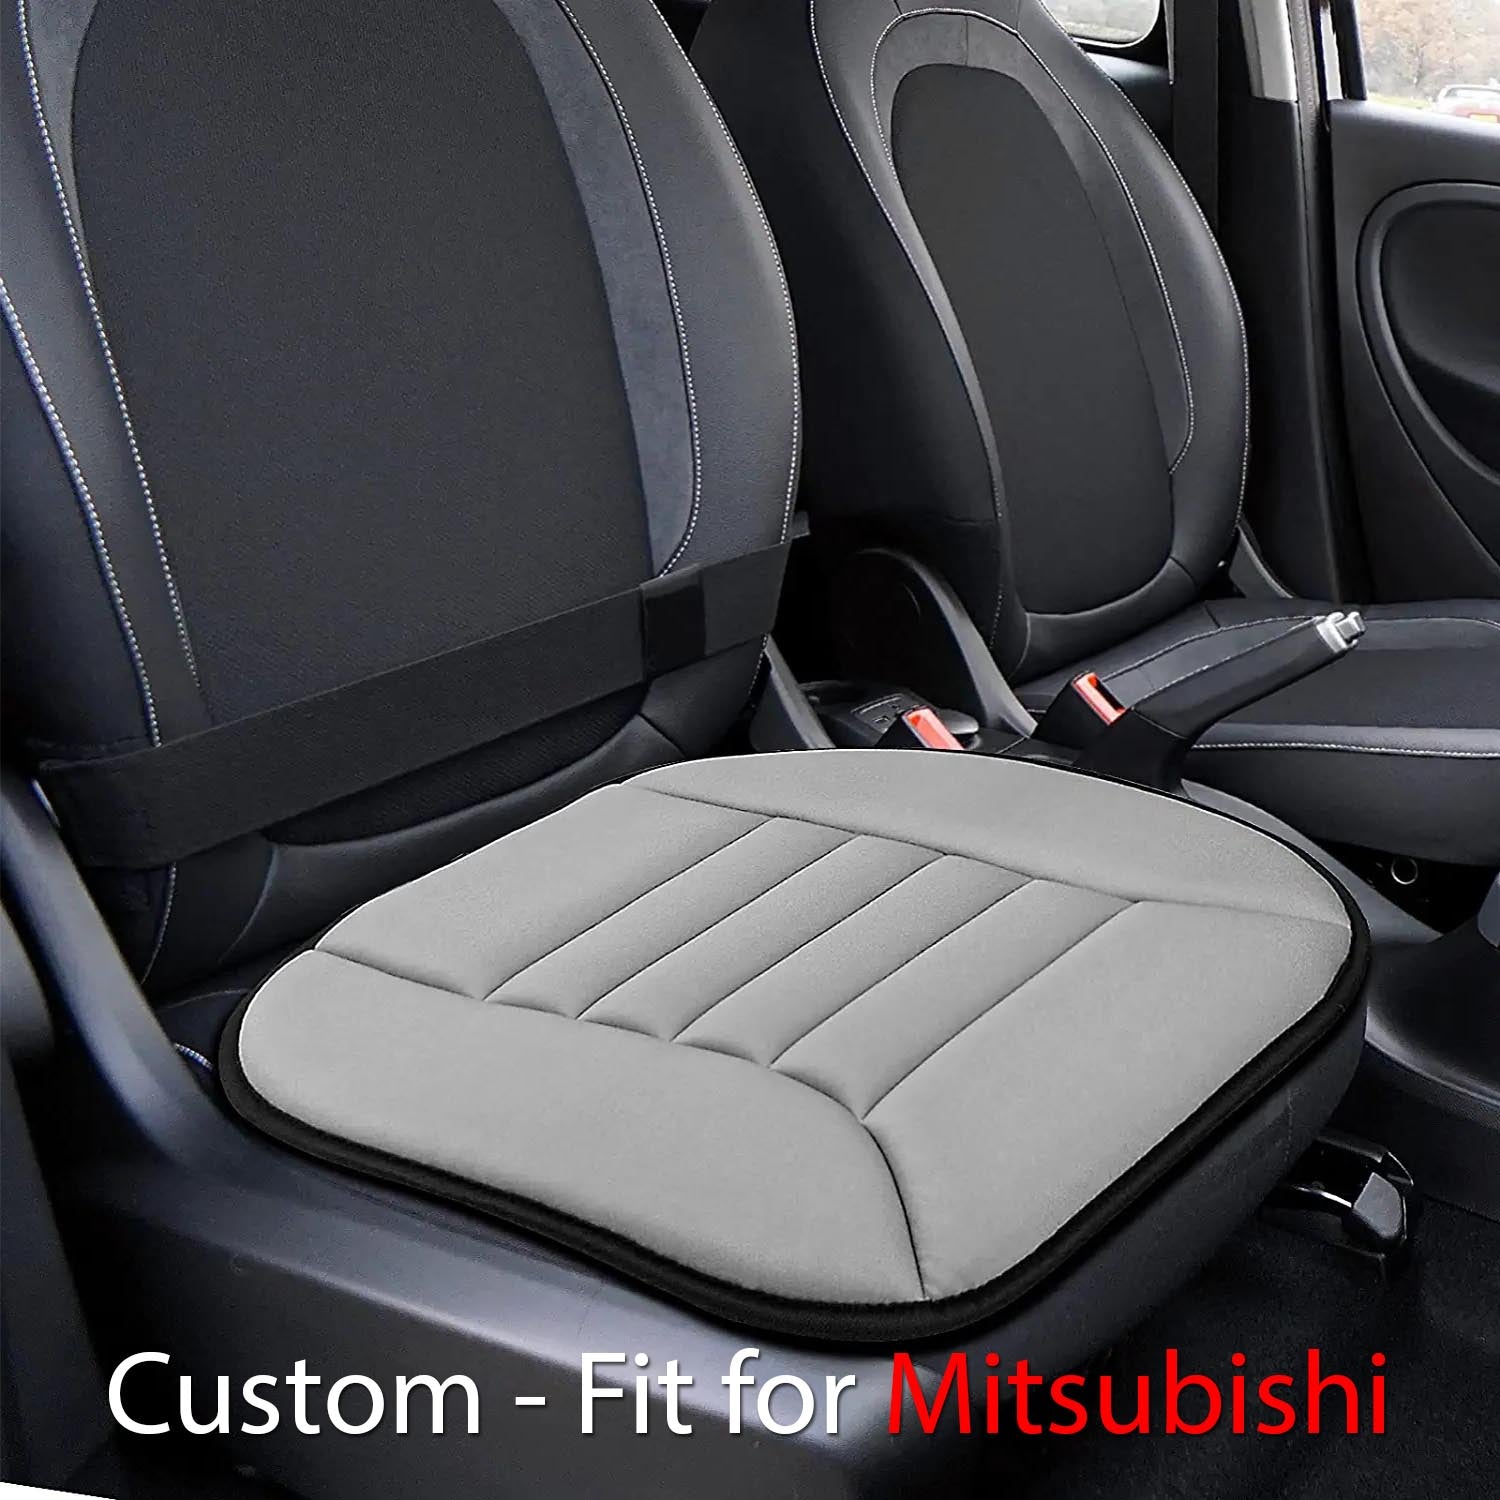 Car Seat Cushion with 1.2inch Comfort Memory Foam, Custom-Fit For Car, Seat Cushion for Car and Office Chair DLNS247